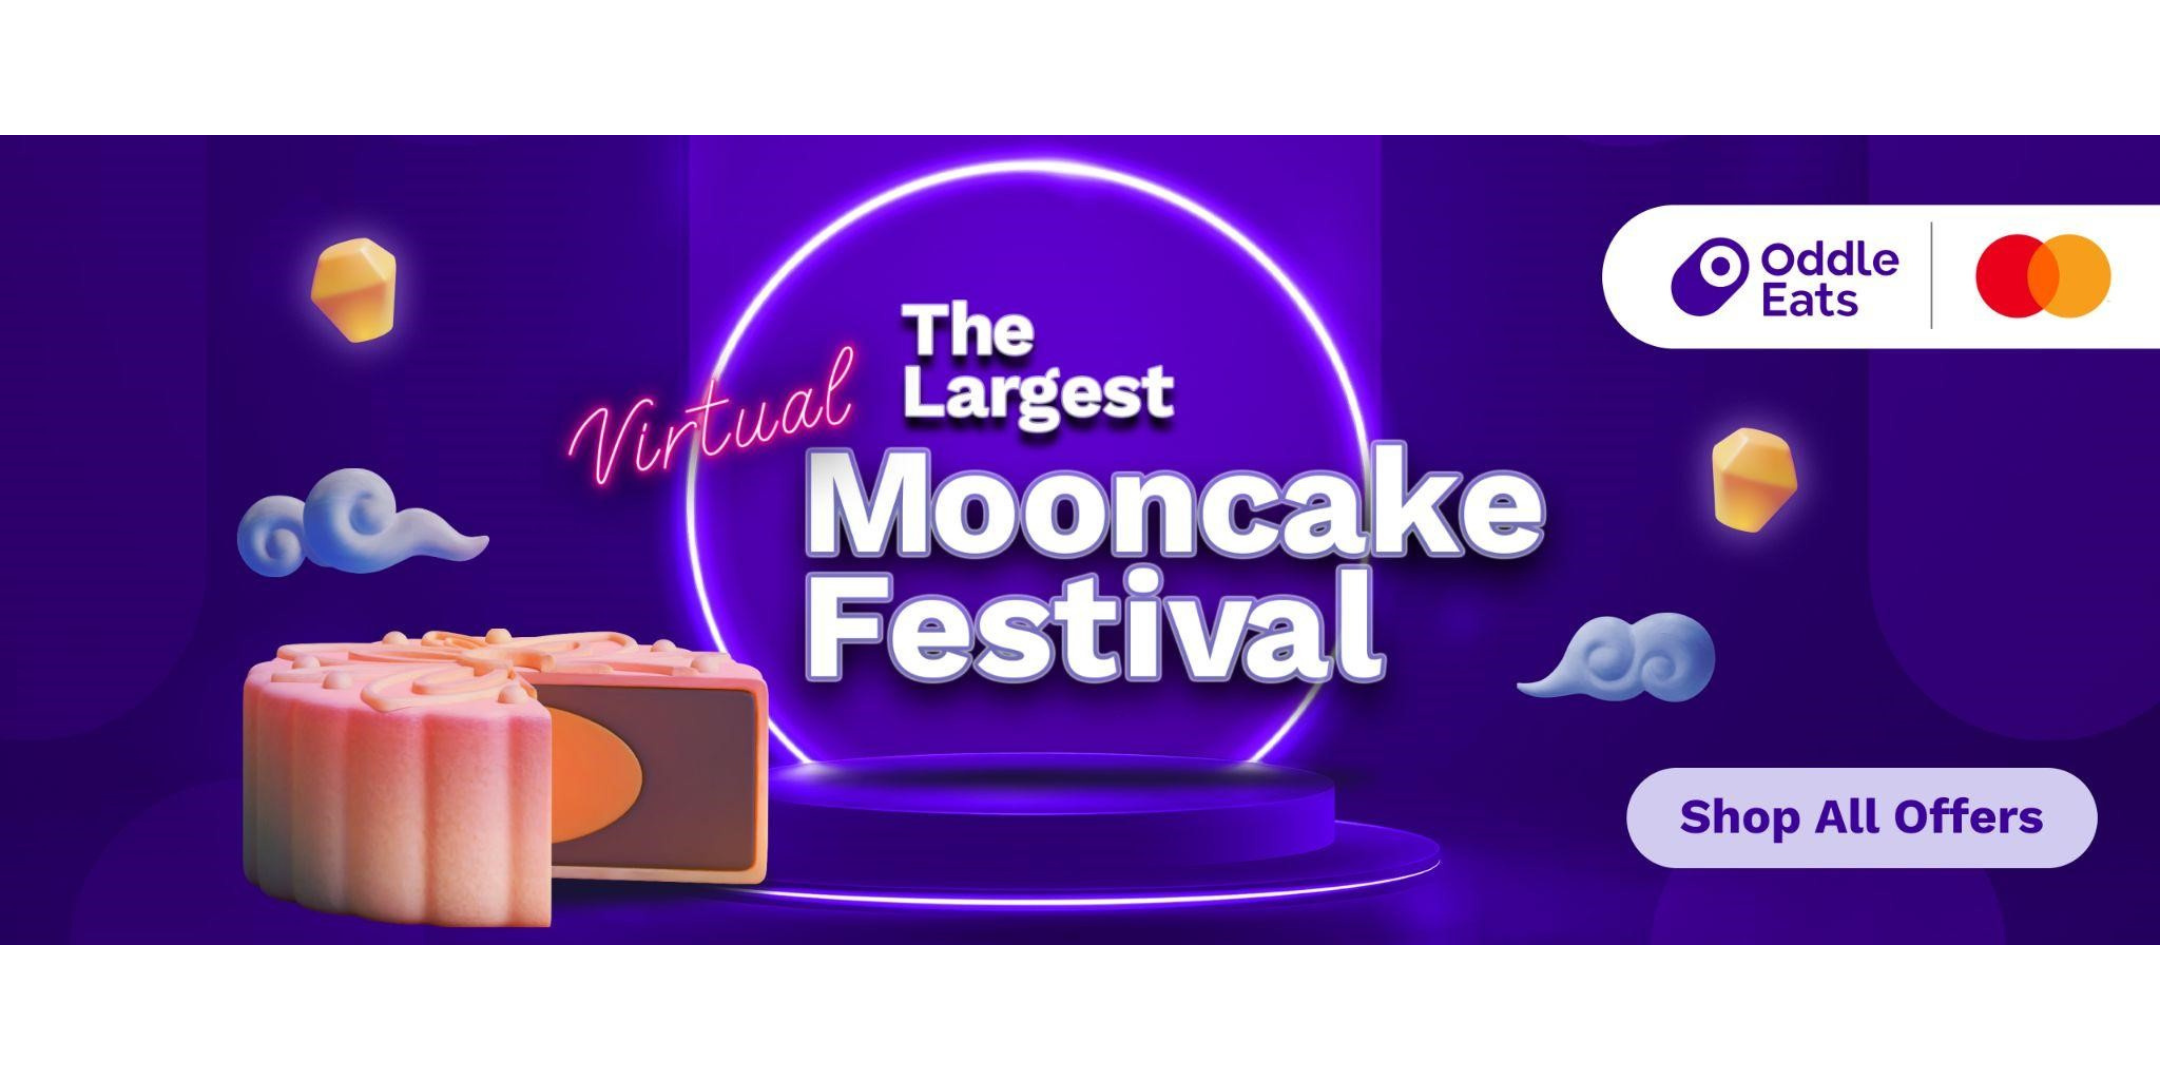 Ultimate Guide to Oddle Eats’ Mega Virtual Mooncake Festival, with Massive Promos up to 35% OFF